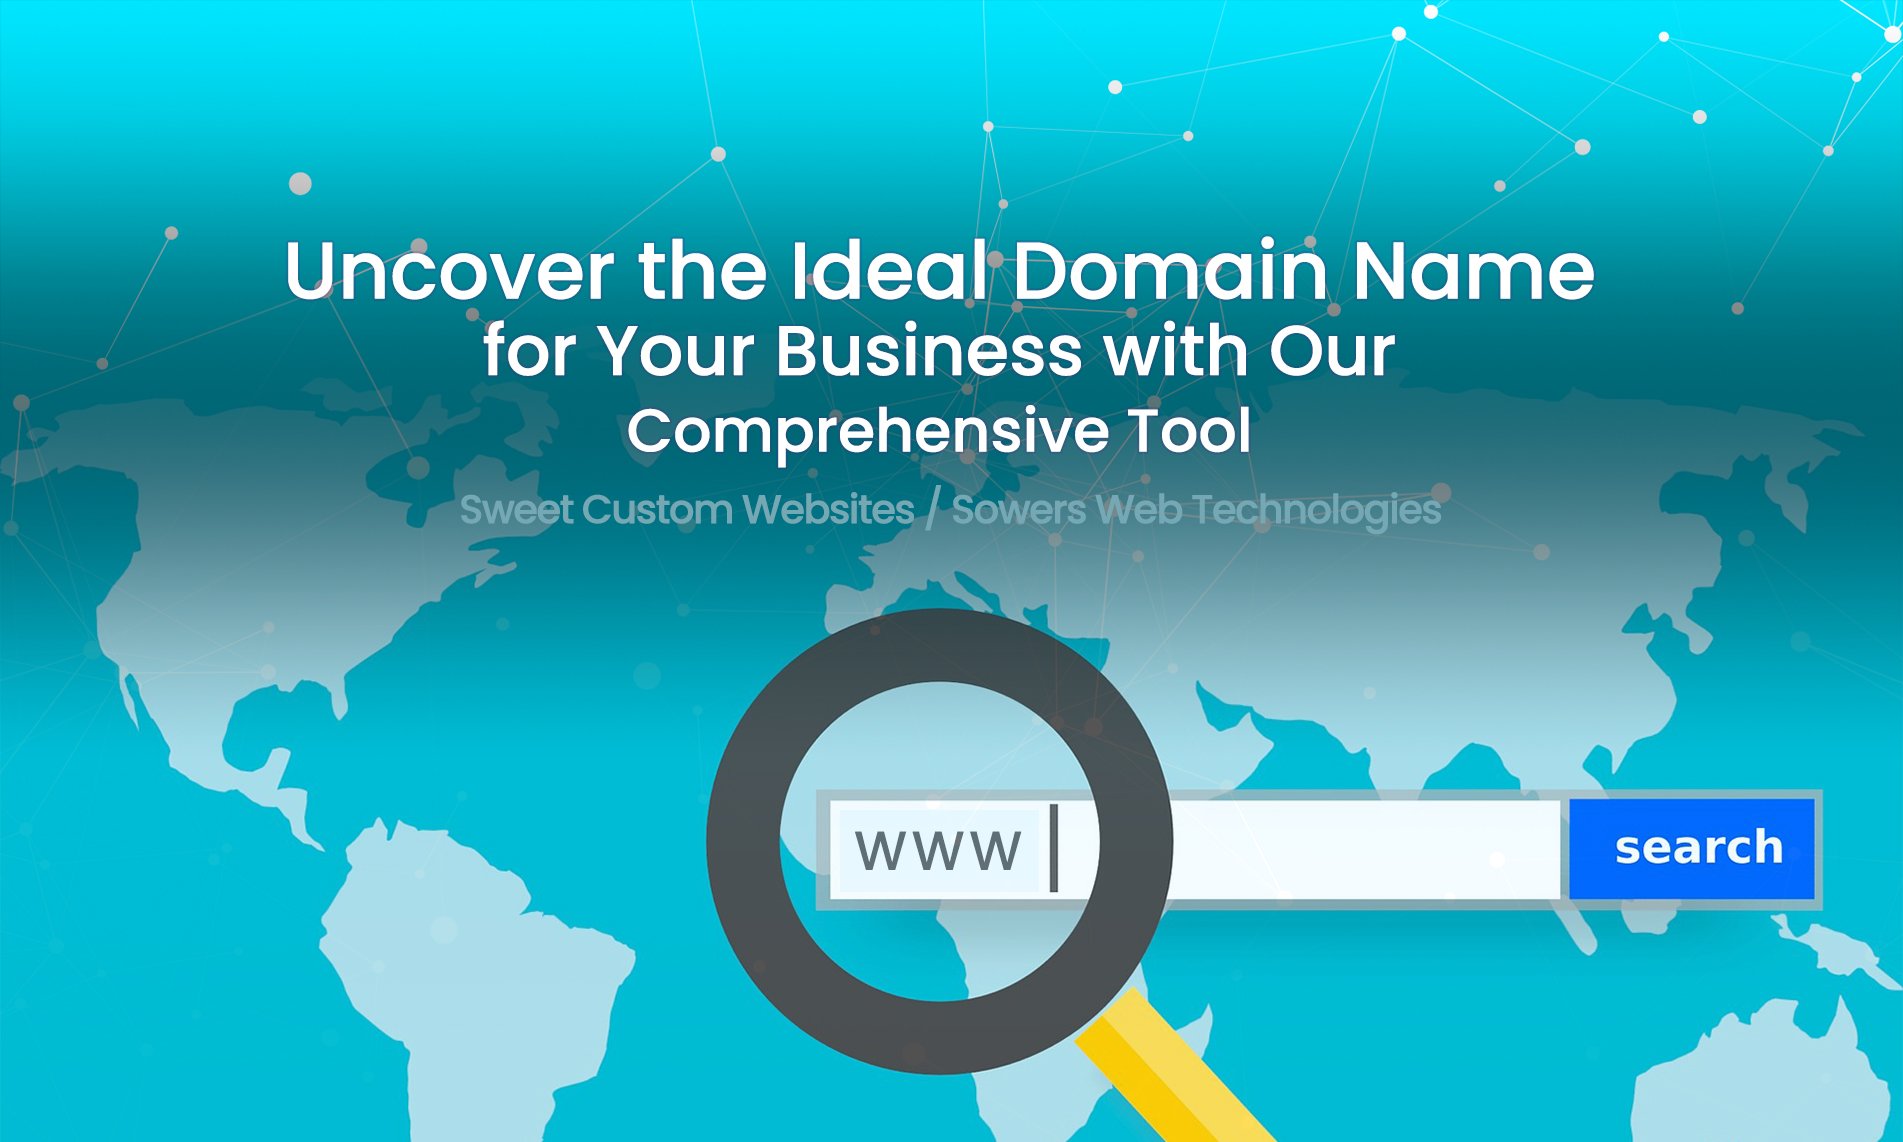 Uncover the Ideal Domain Name for Your Business with Our Comprehensive Tool